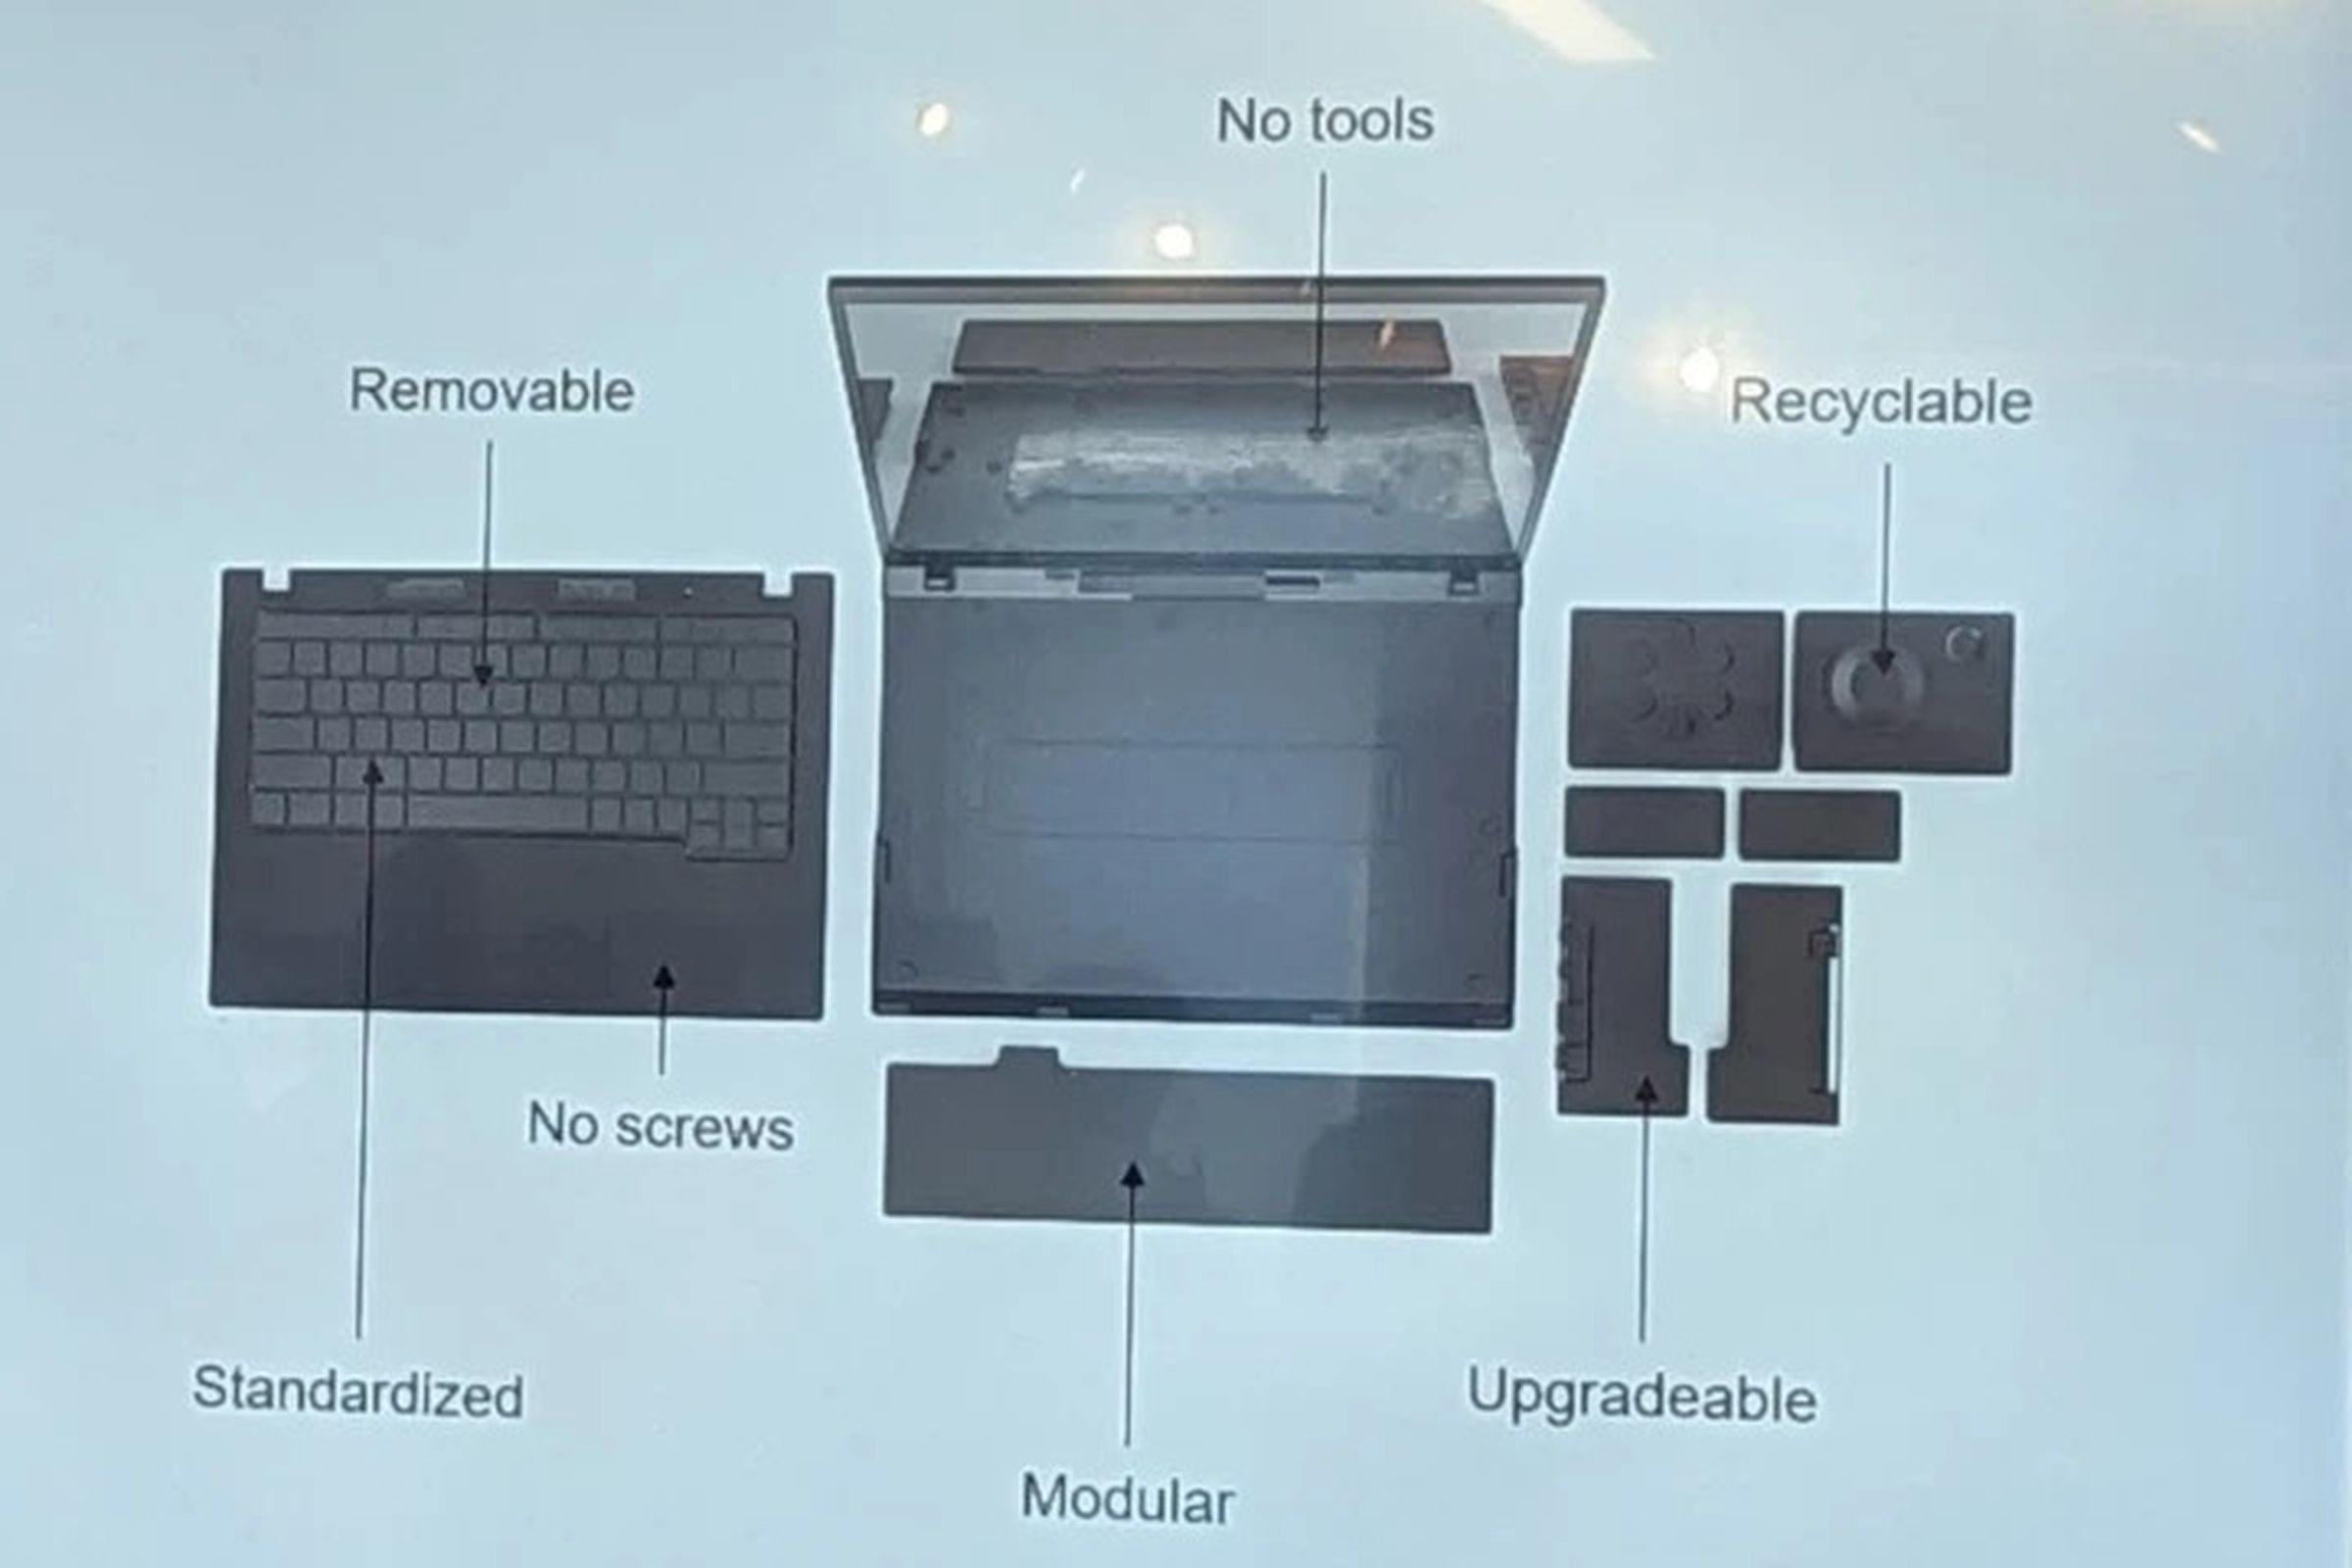 a laptop concept illustration showing the top case removed along with he battery, keyboard, speakers, and other components splayed.